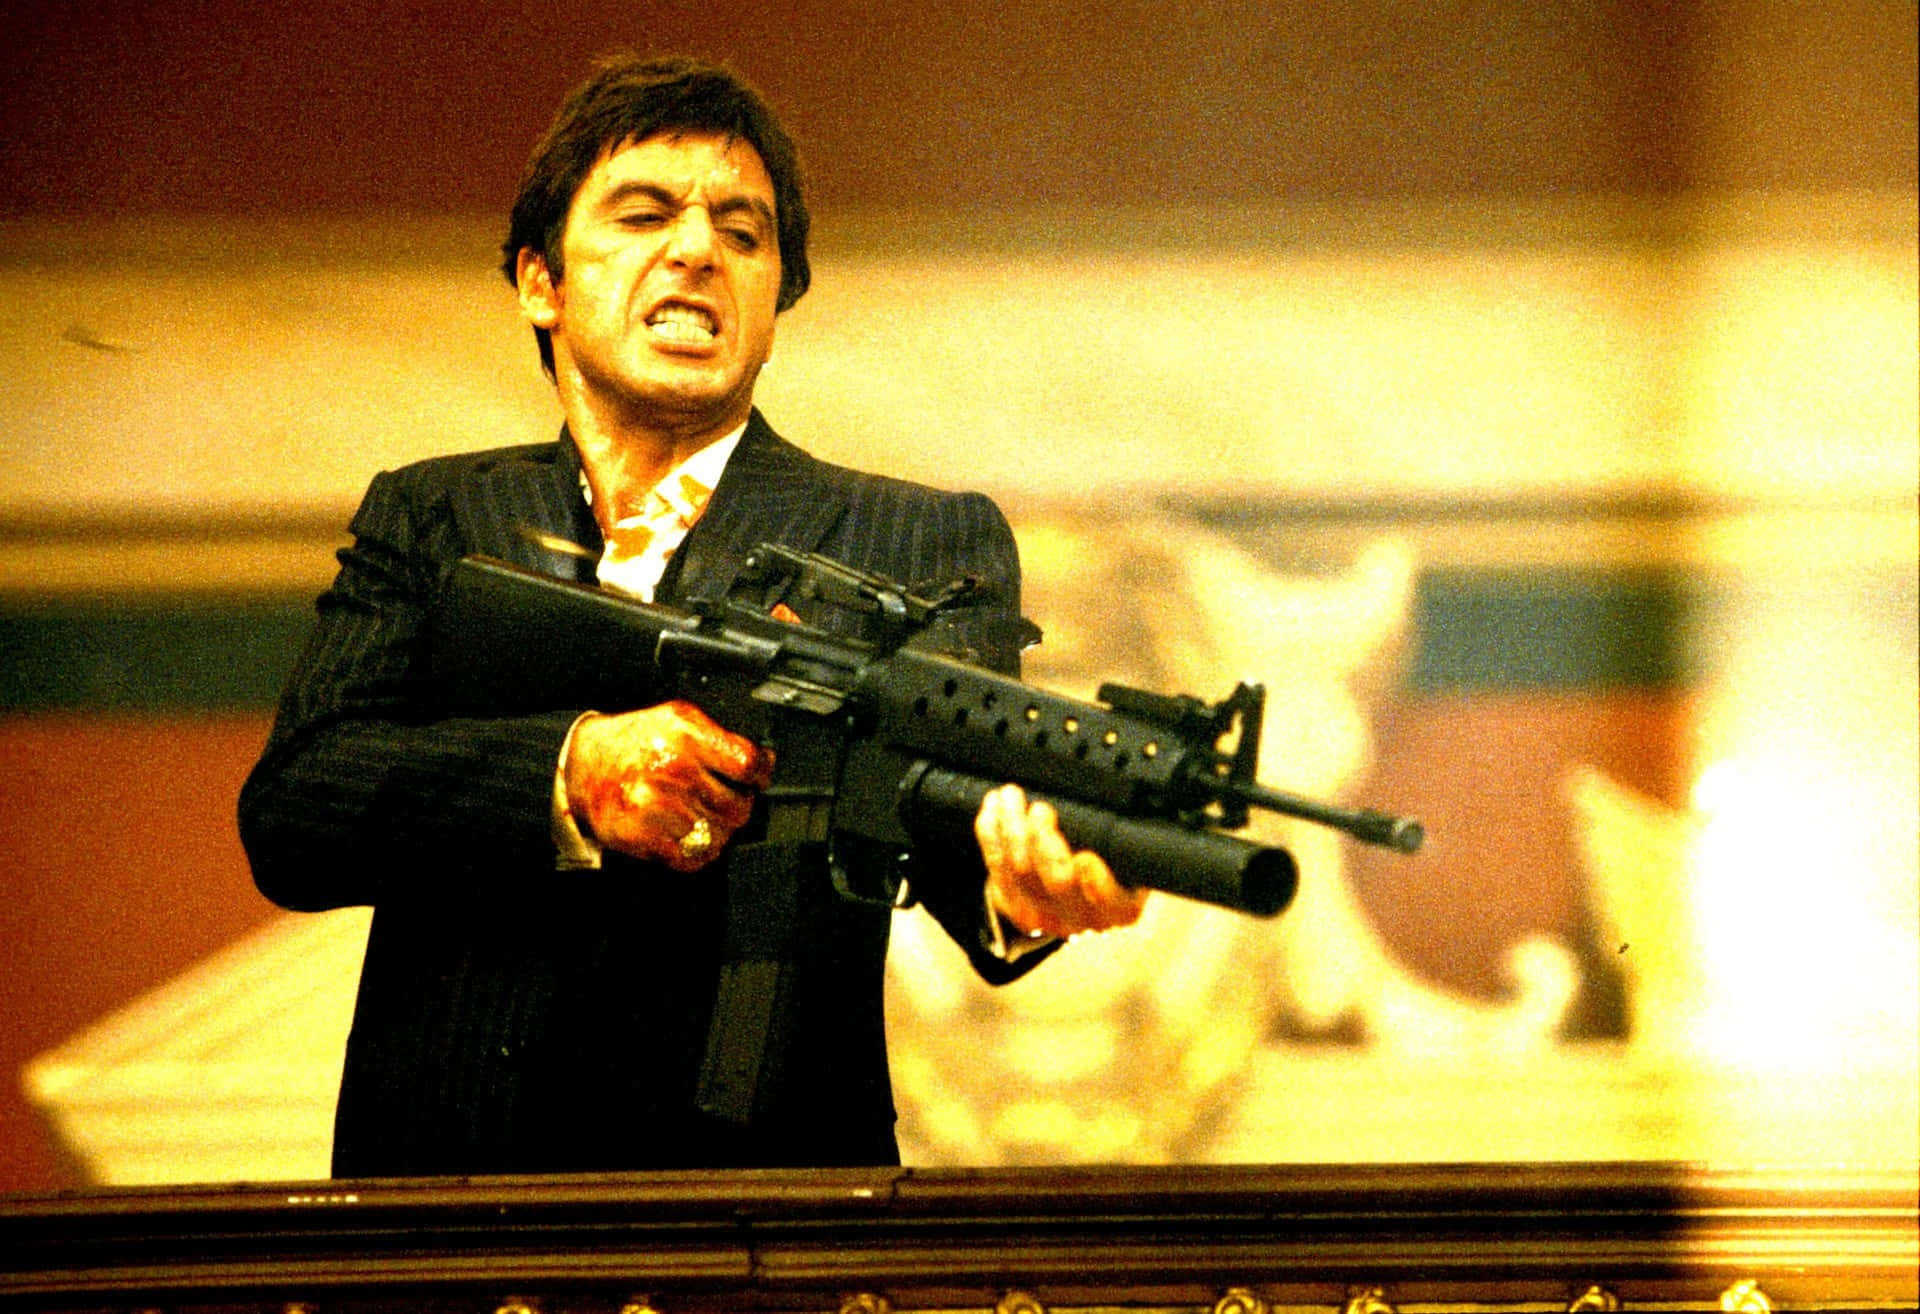 “Say hello to my little friend”- Scarface